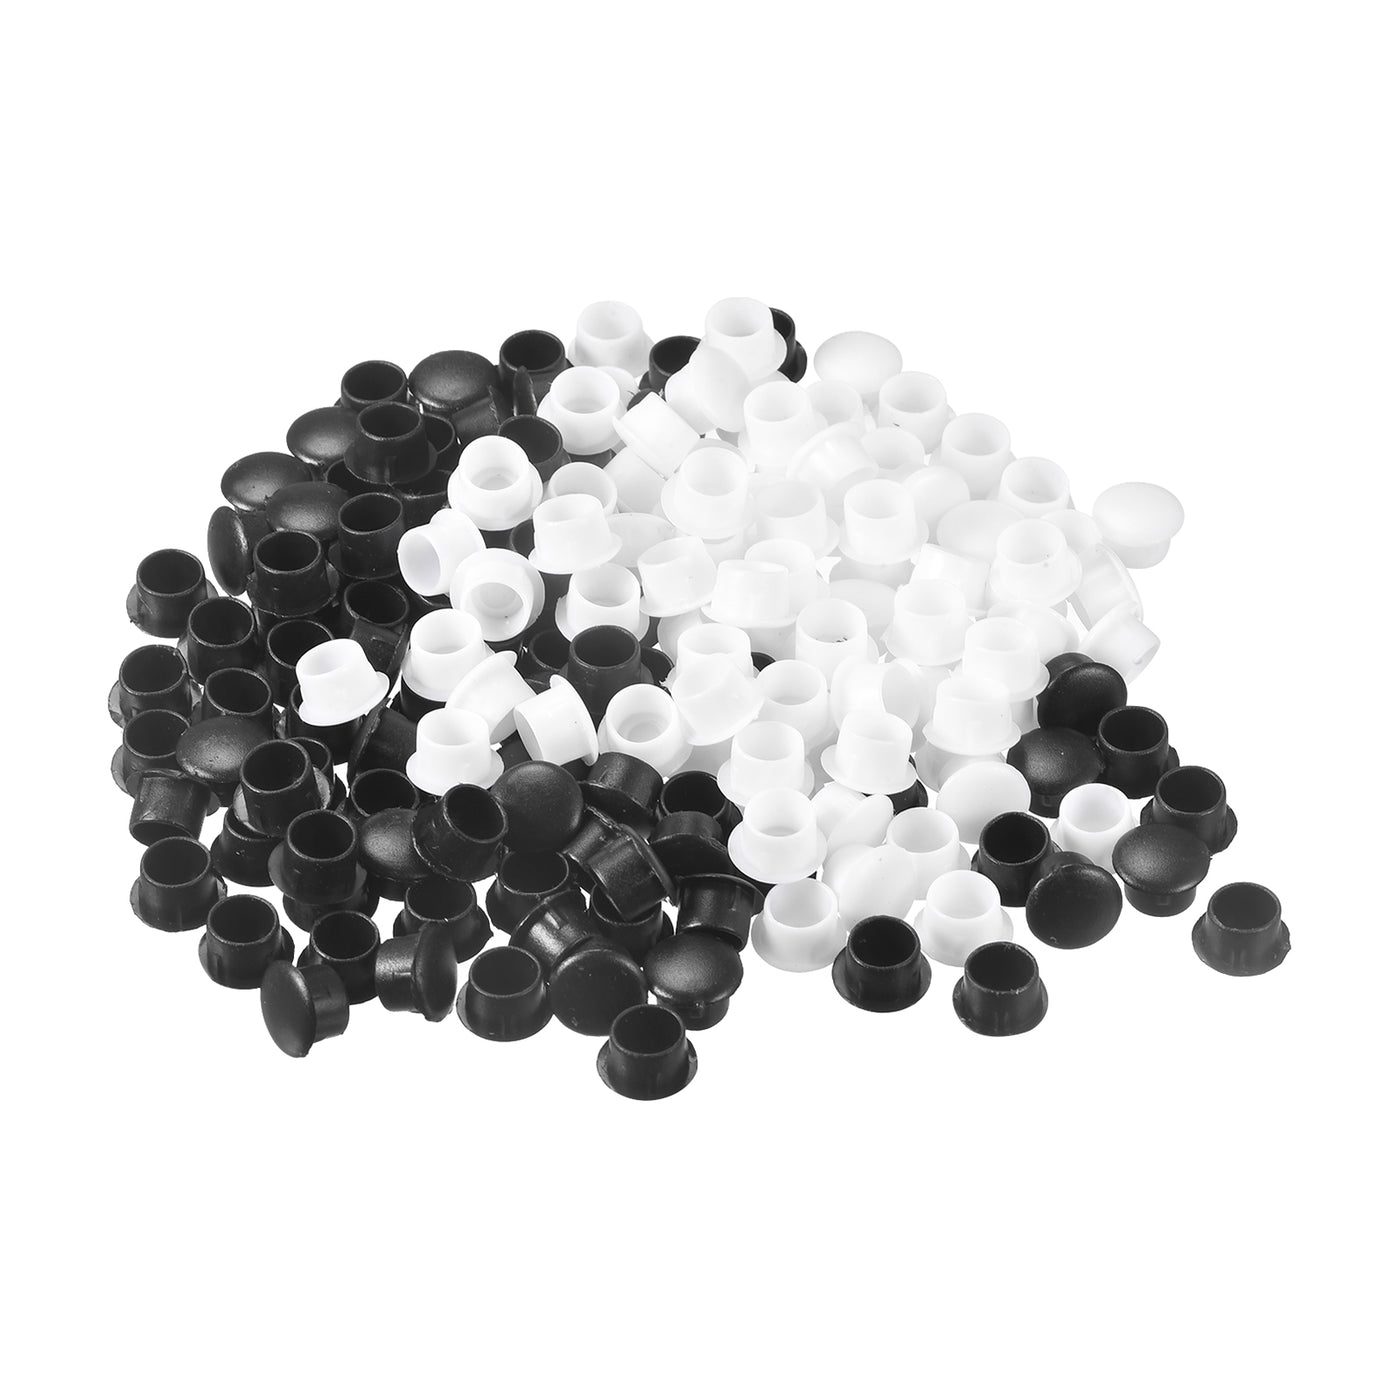 uxcell Uxcell Screw Hole Plugs, 10mm(25/64") Dia PP Snap in Shelf Button Flush Type Caps for Furniture Cabinet Cupboard, Black/Milky White 200 Pcs